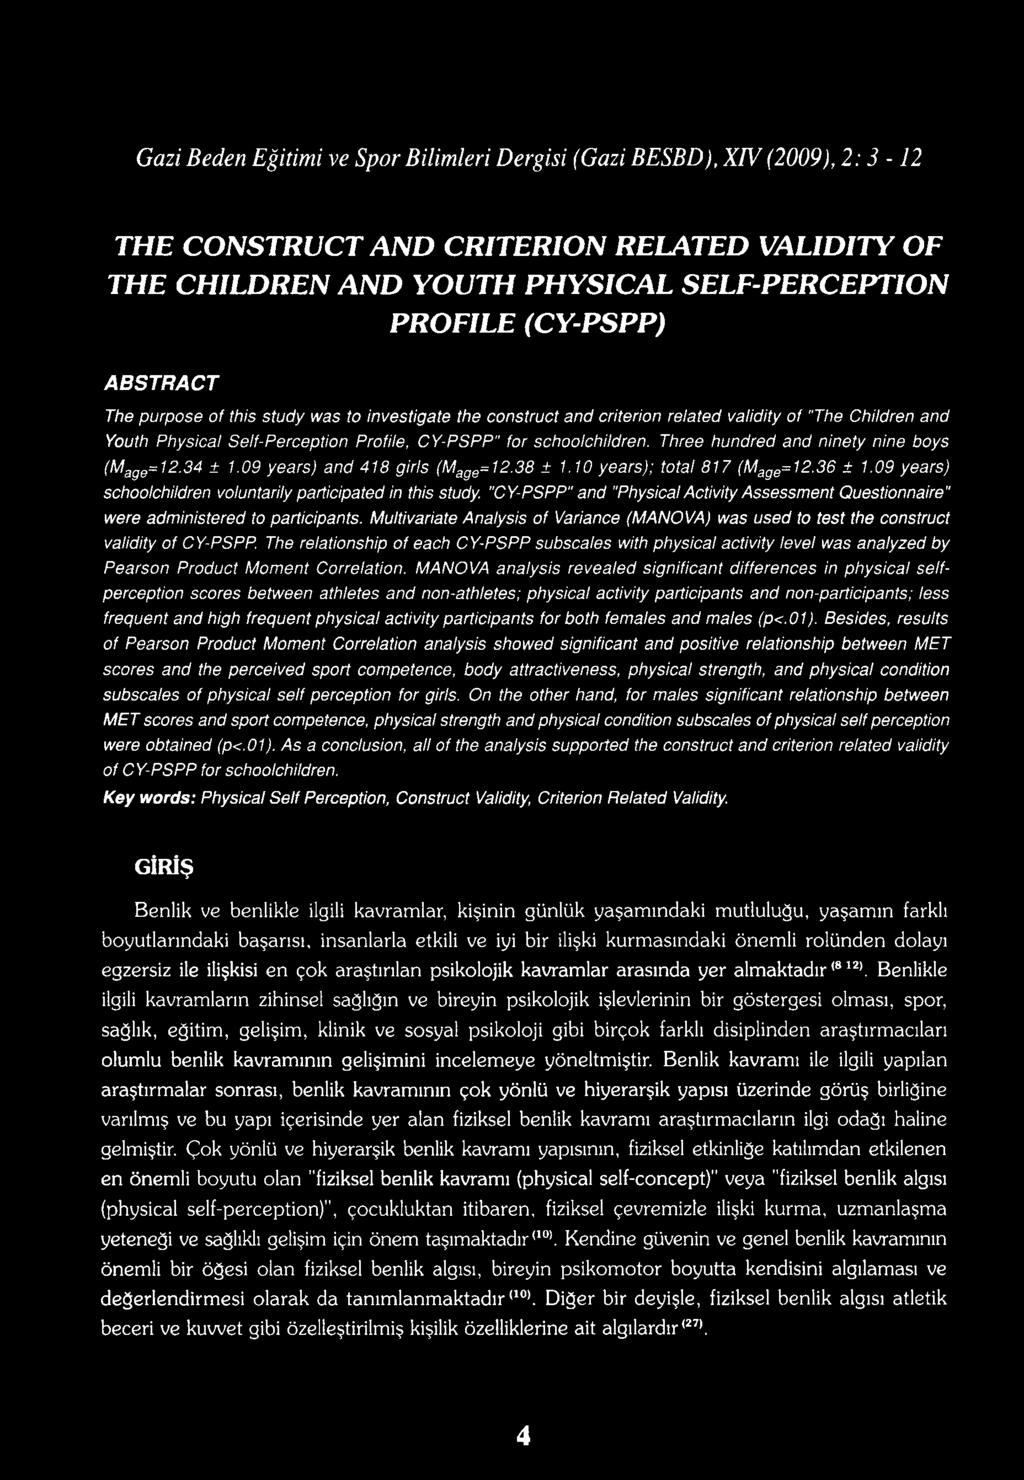 THE CONSTRUCT AND CRITERION RELATED VALIDITY OF THE CHILDREN AND YOUTH PHYSICAL SELF-PERCEPTION PROFILE (CY-PSPP) ABSTRACT The purpose of this study was to investigate the construct and criterion